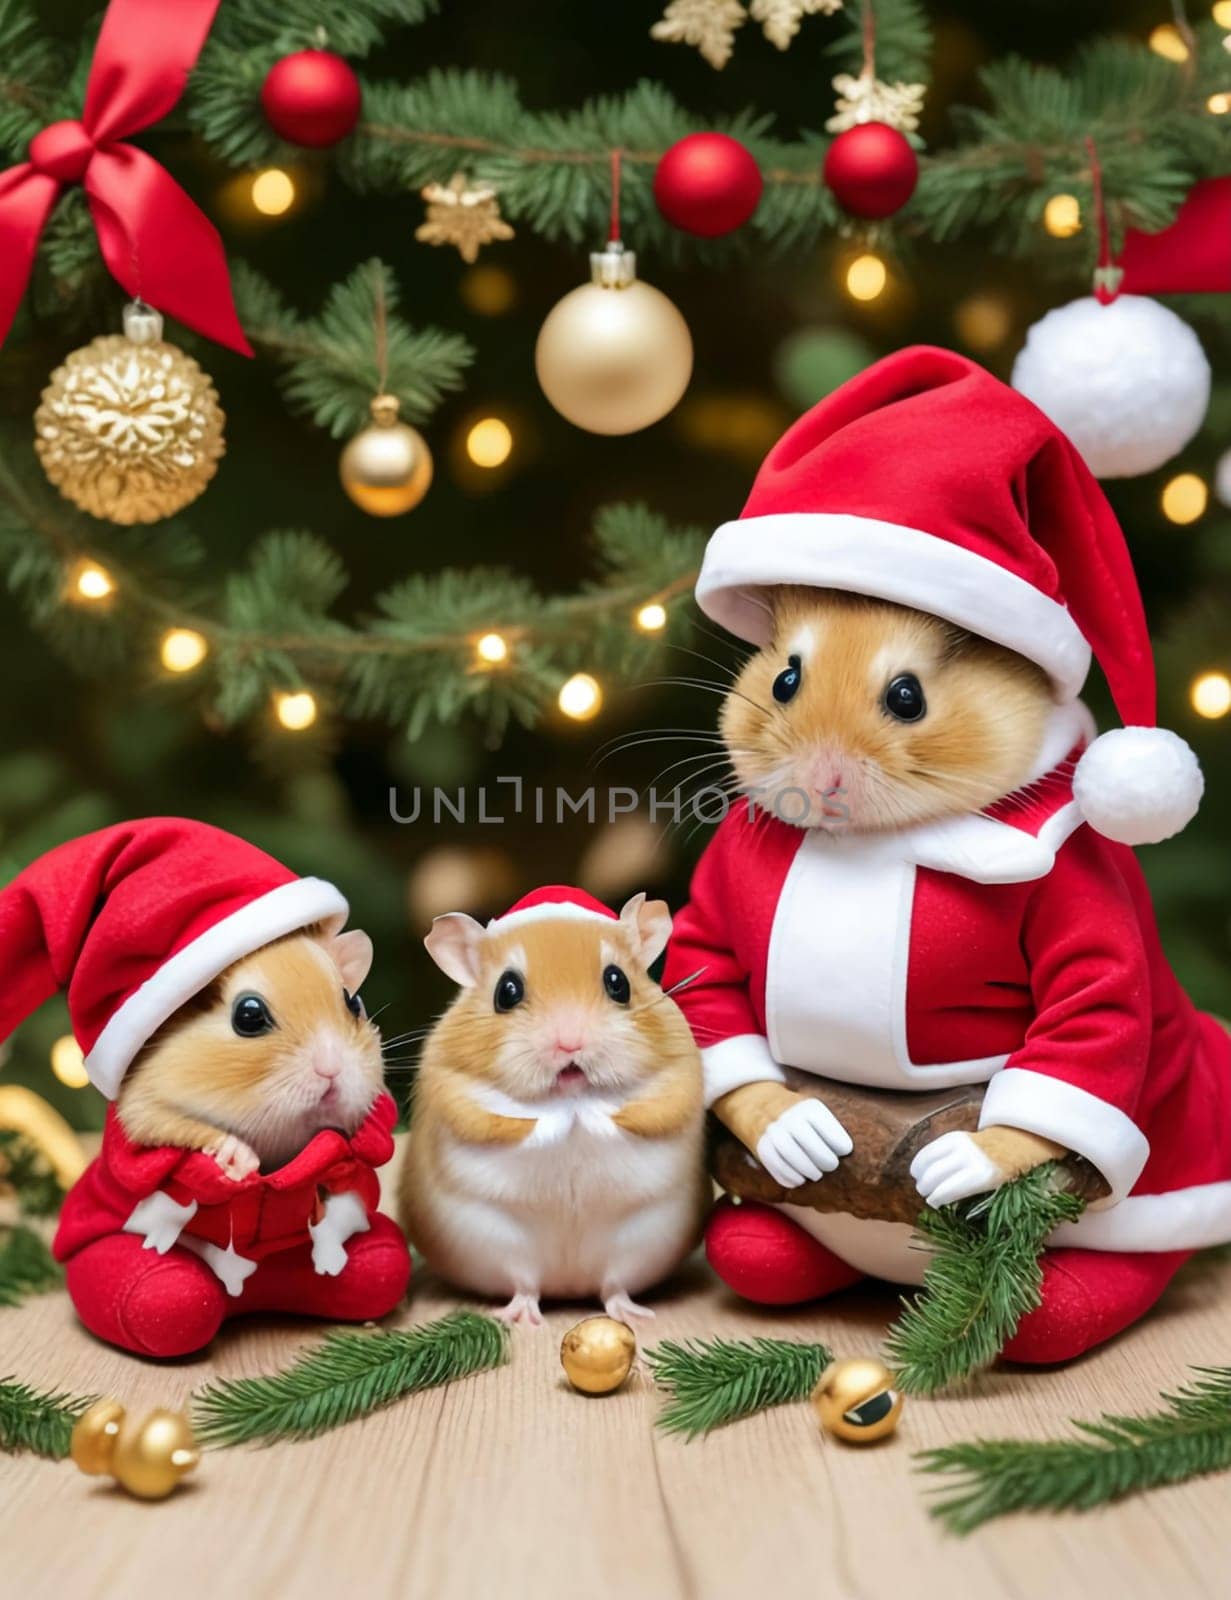 Hamsters in Santa's Christmas hats in the woods with Christmas toys and garlands